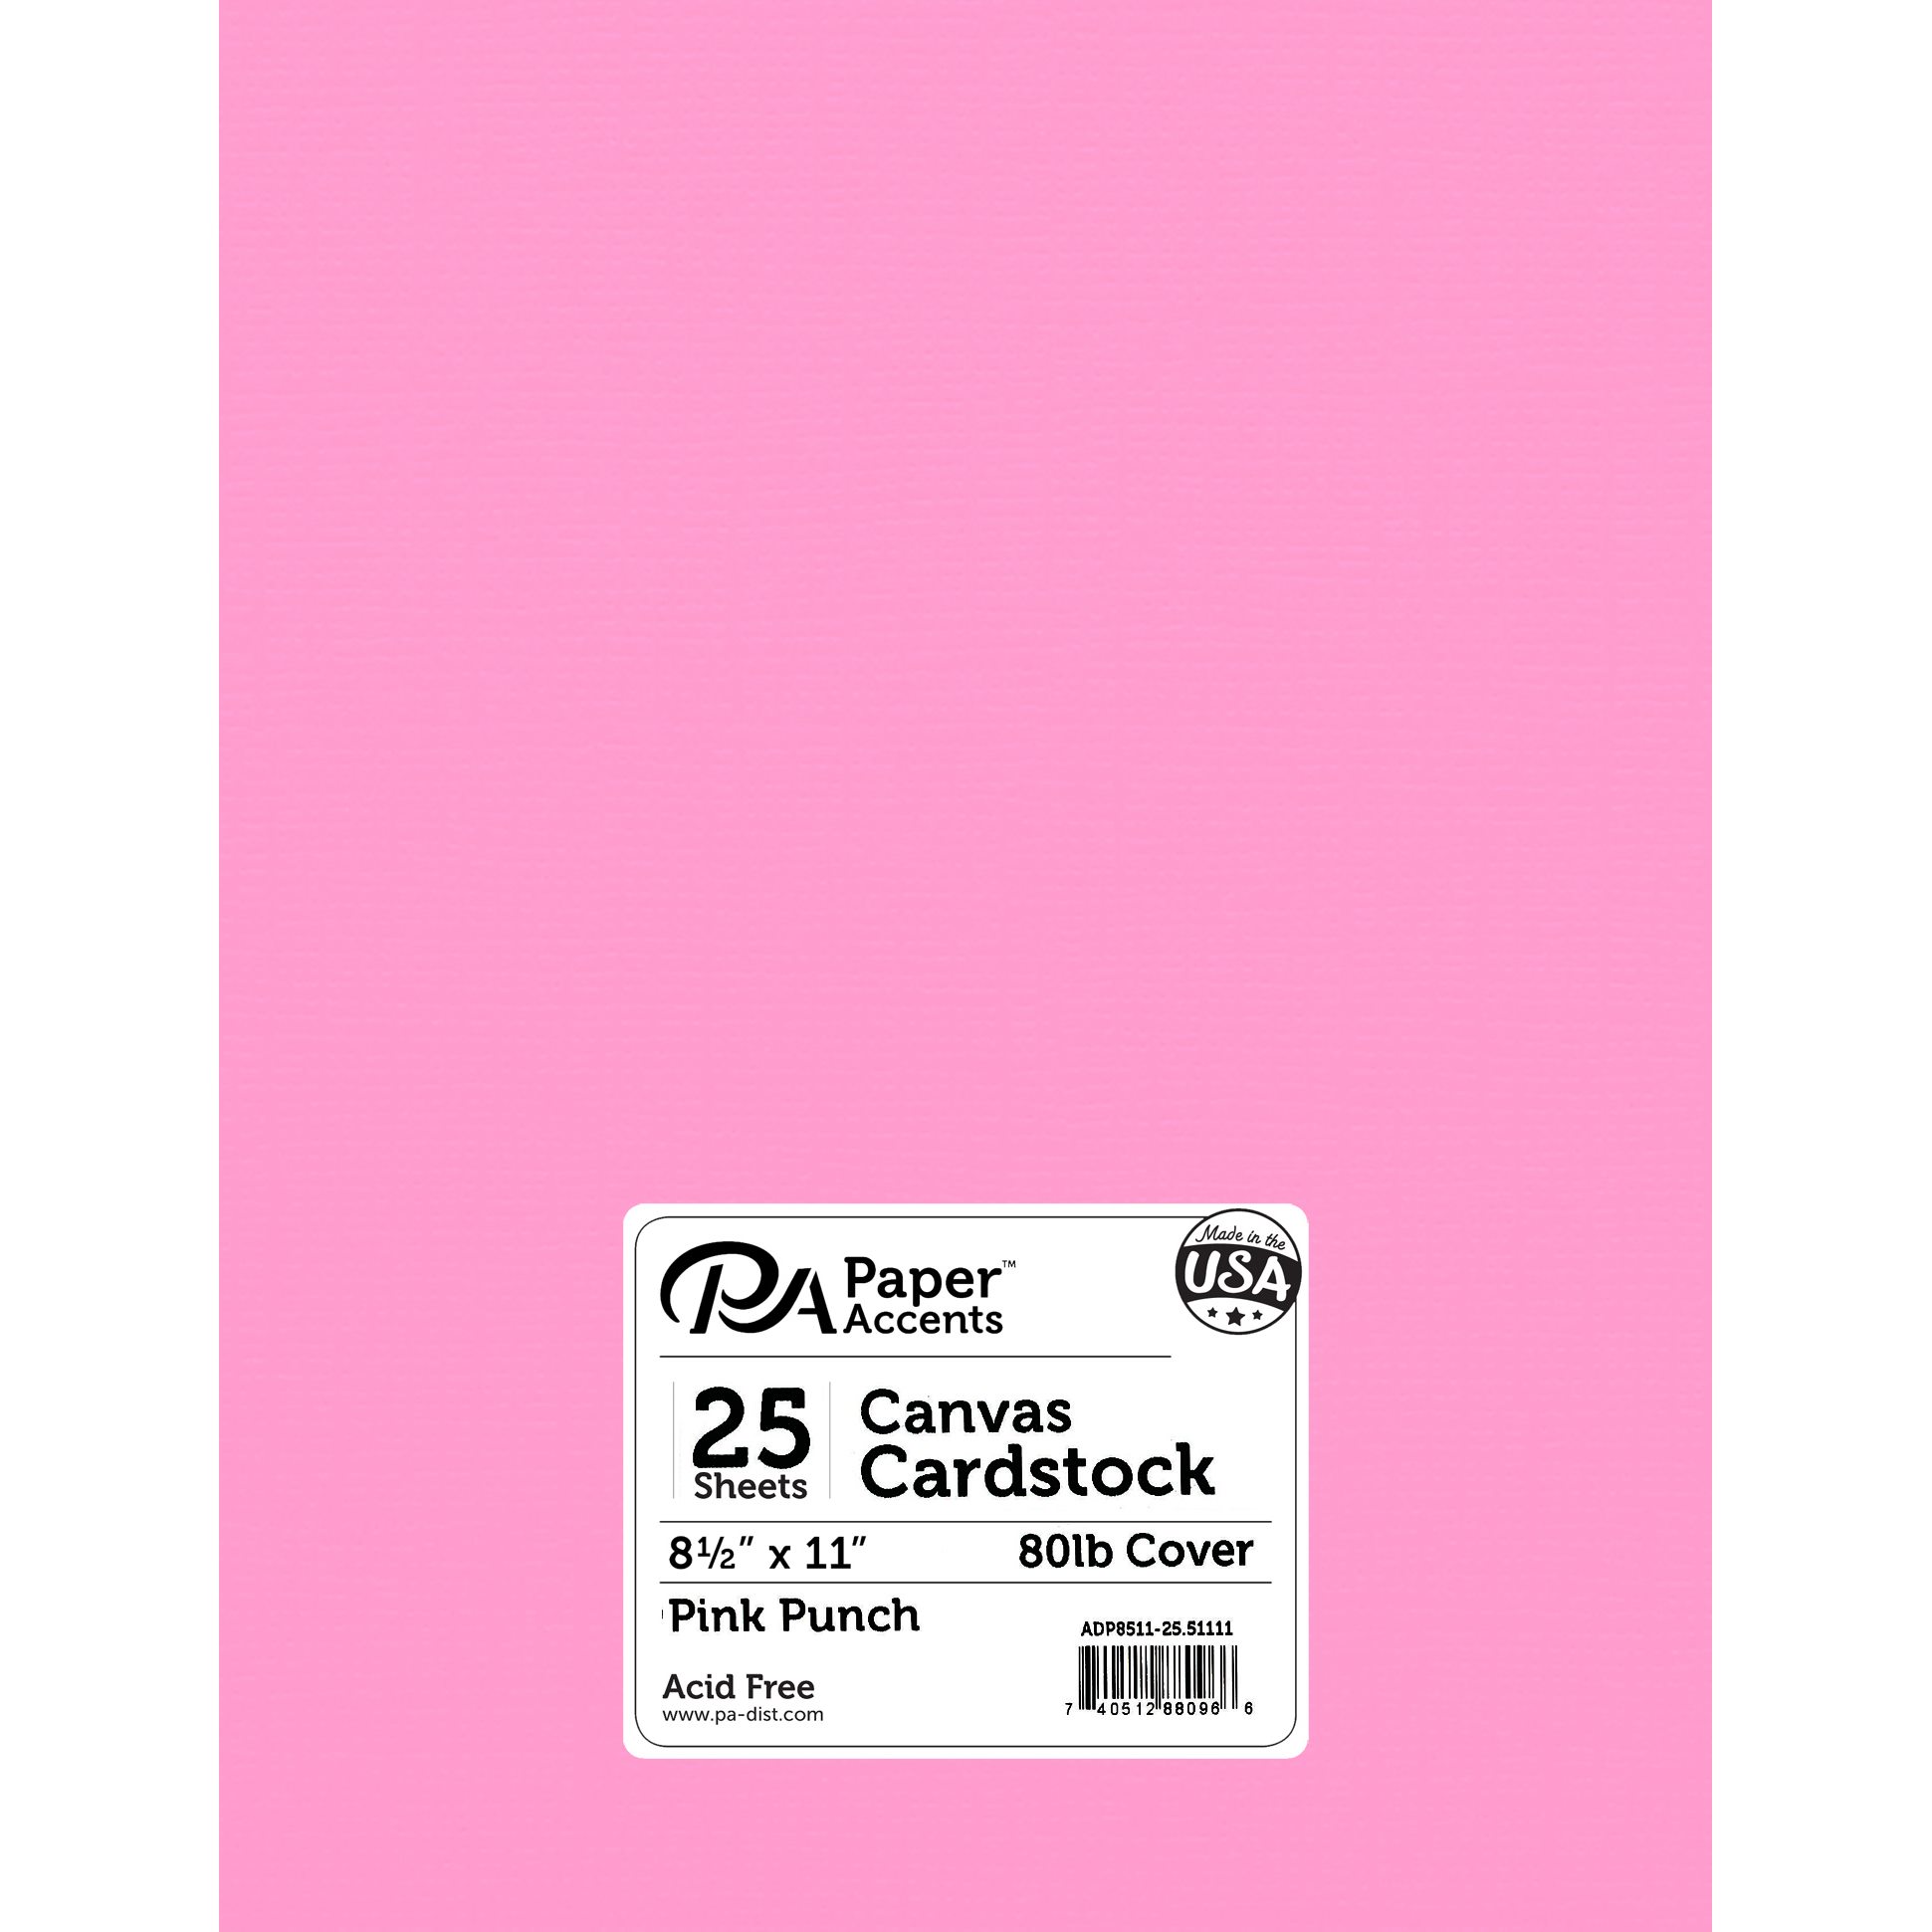 Paper Accents Cdstk Canvas 8.5x11 80lb Pink Punch